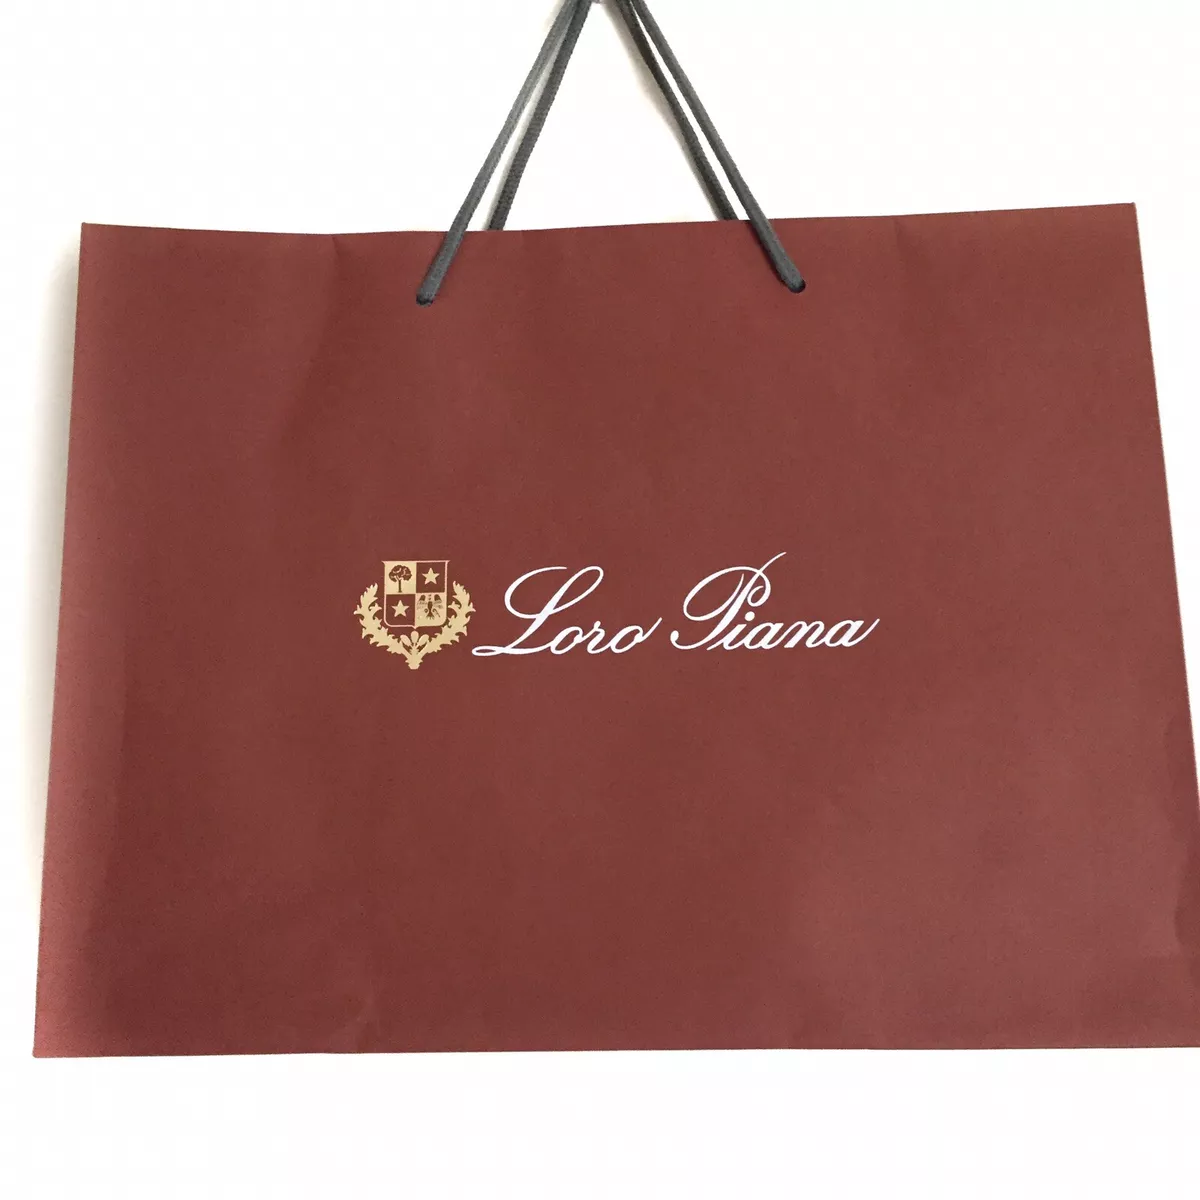 Loro Piana bags second hand prices